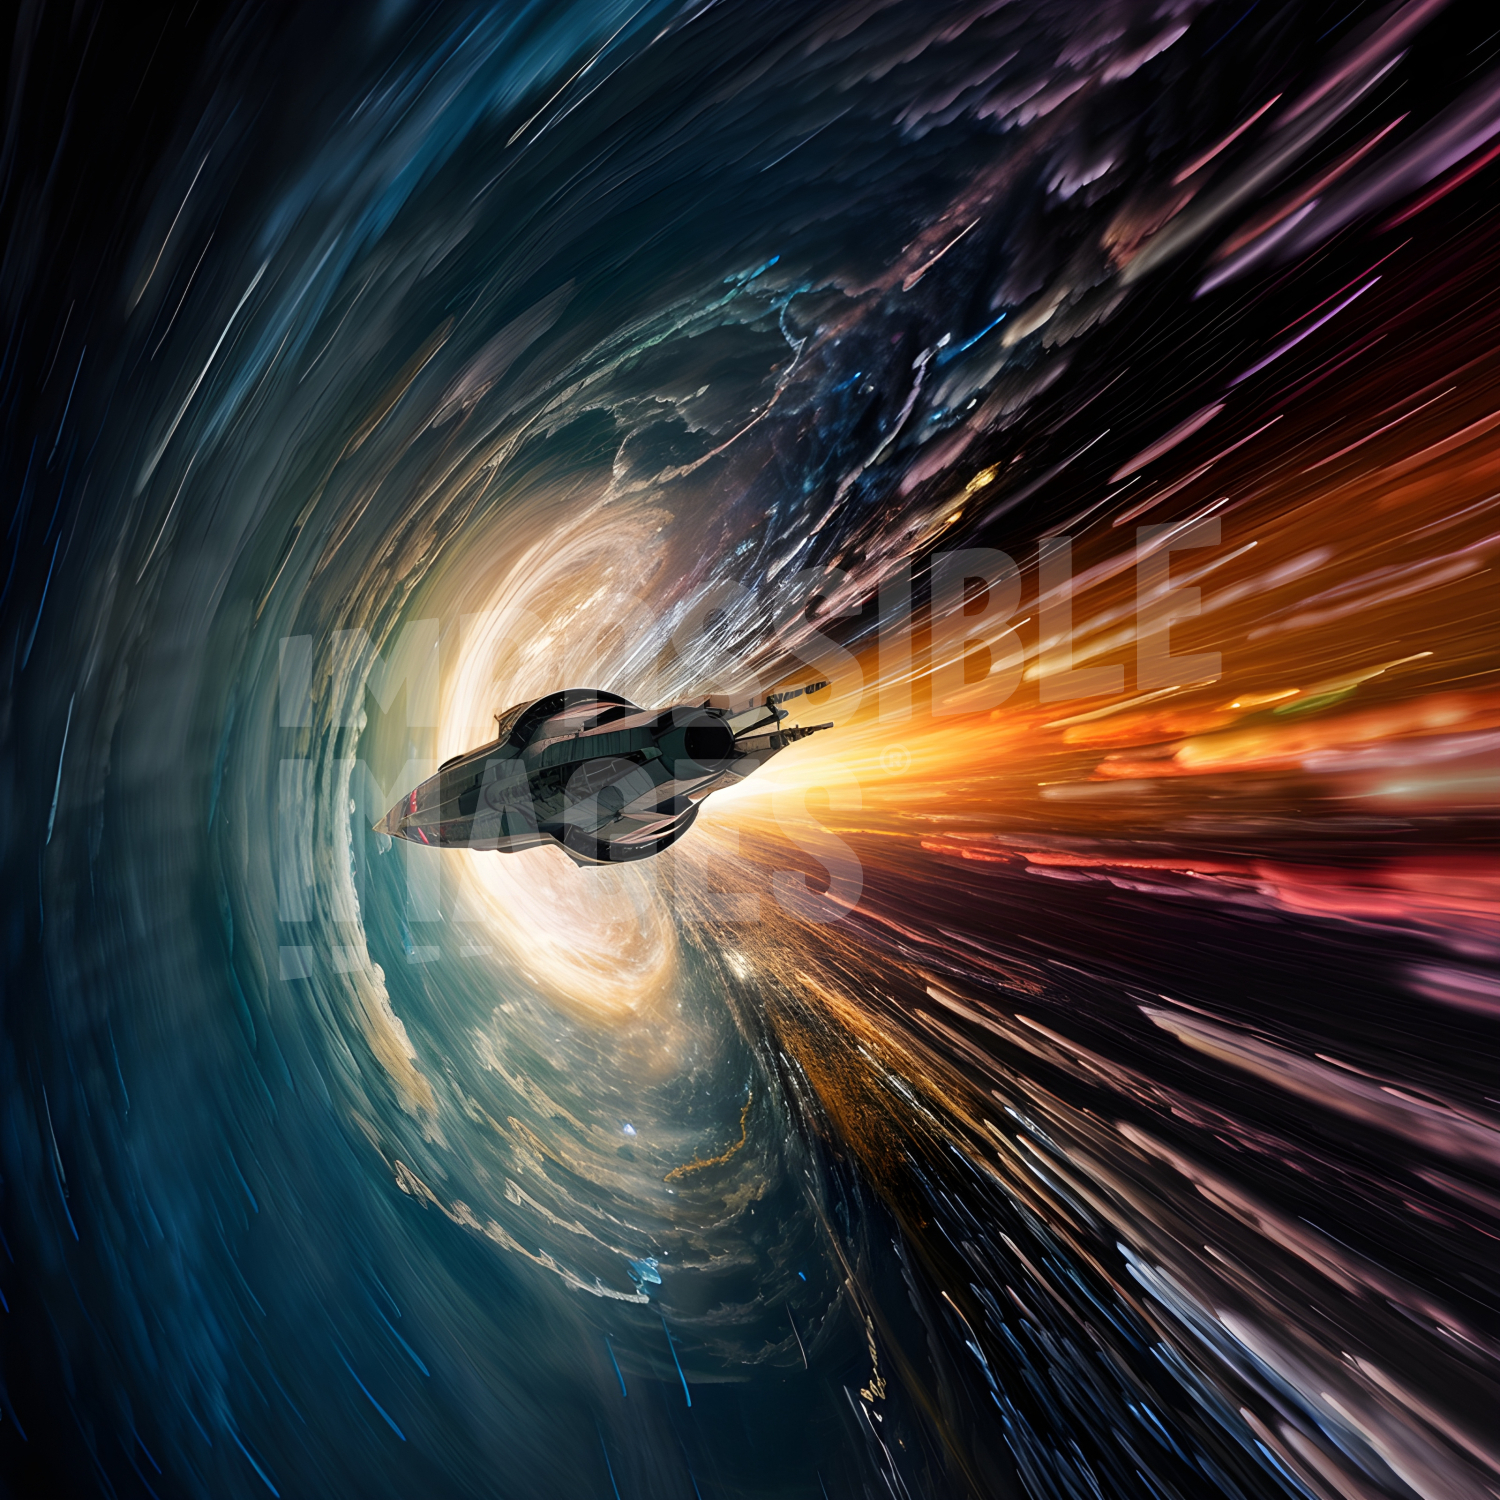 A space ship traveling through a vortex of light - 